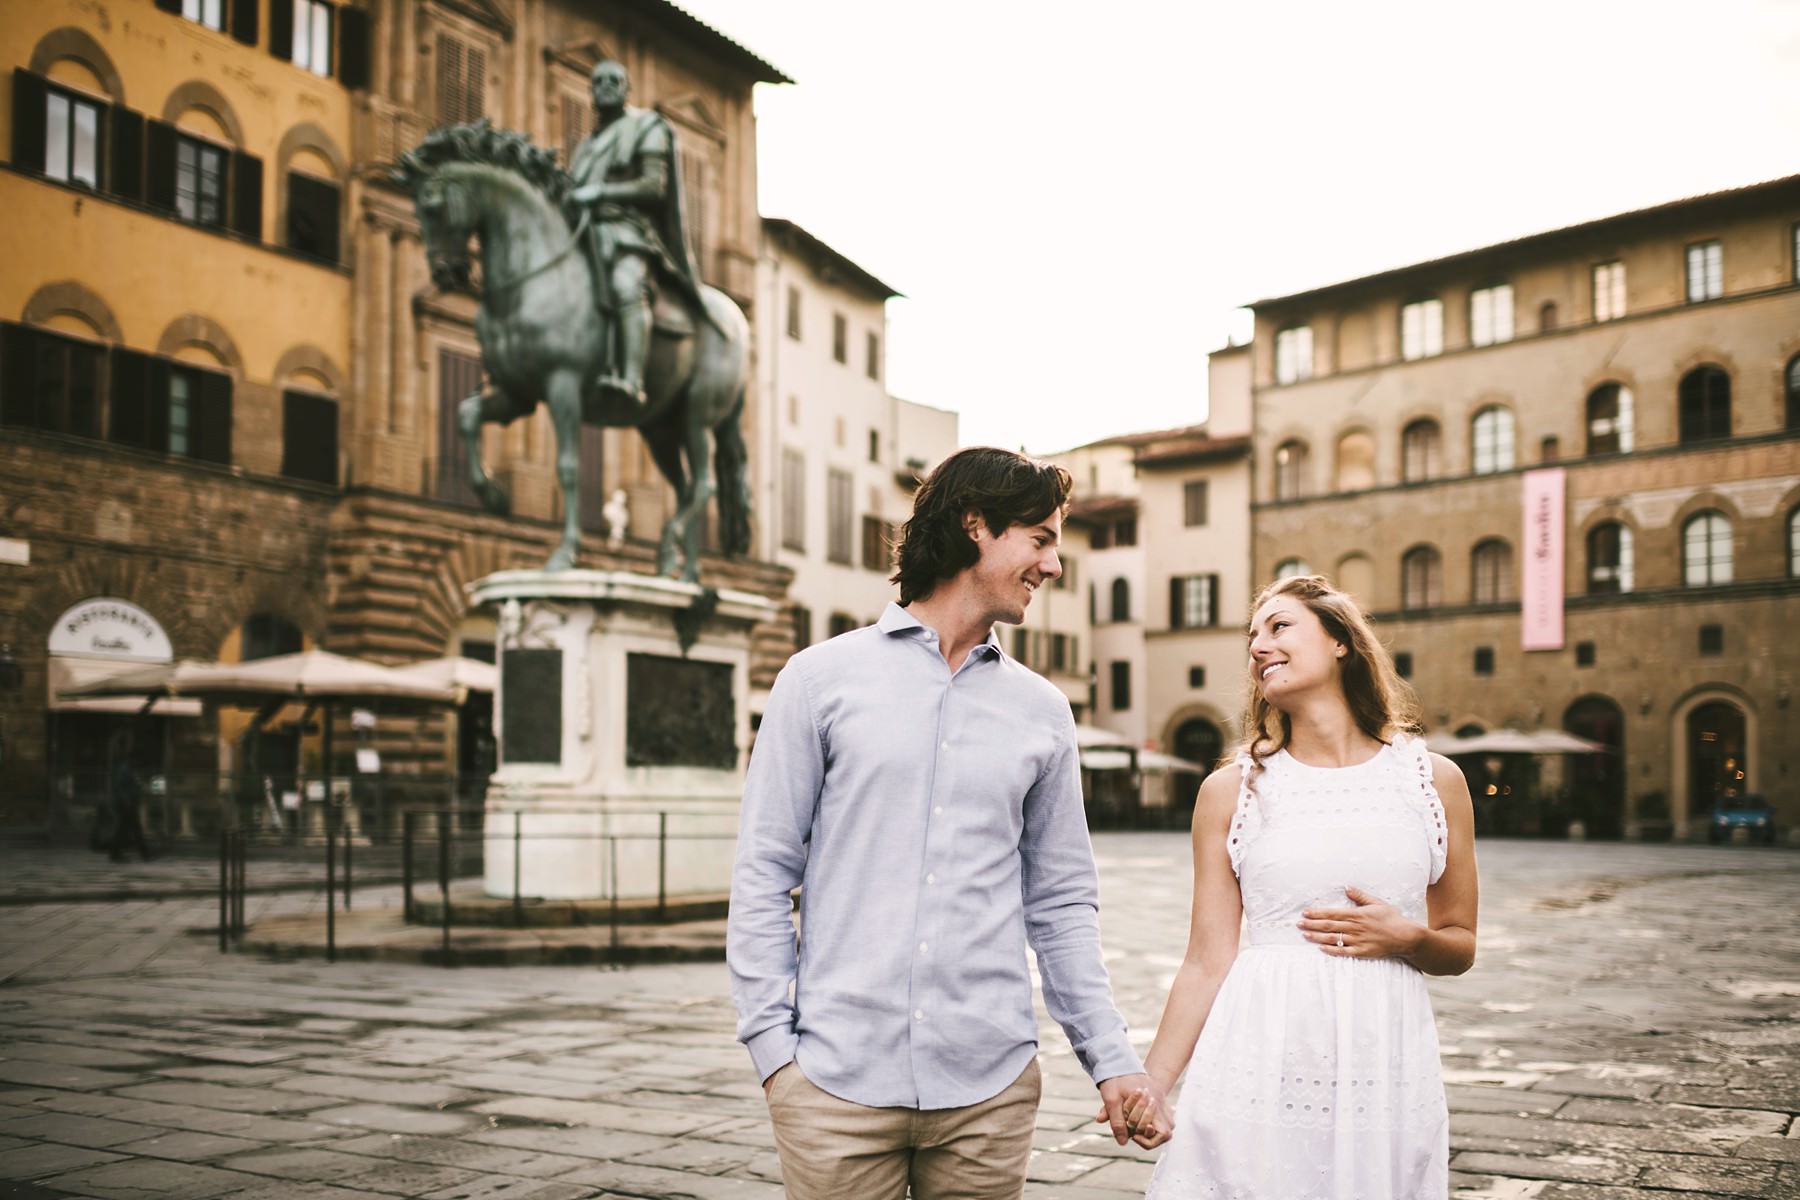 Lovely couple engagement photo shoot at sunrise time in Florence. Romantic couple portrait vacation photo session.